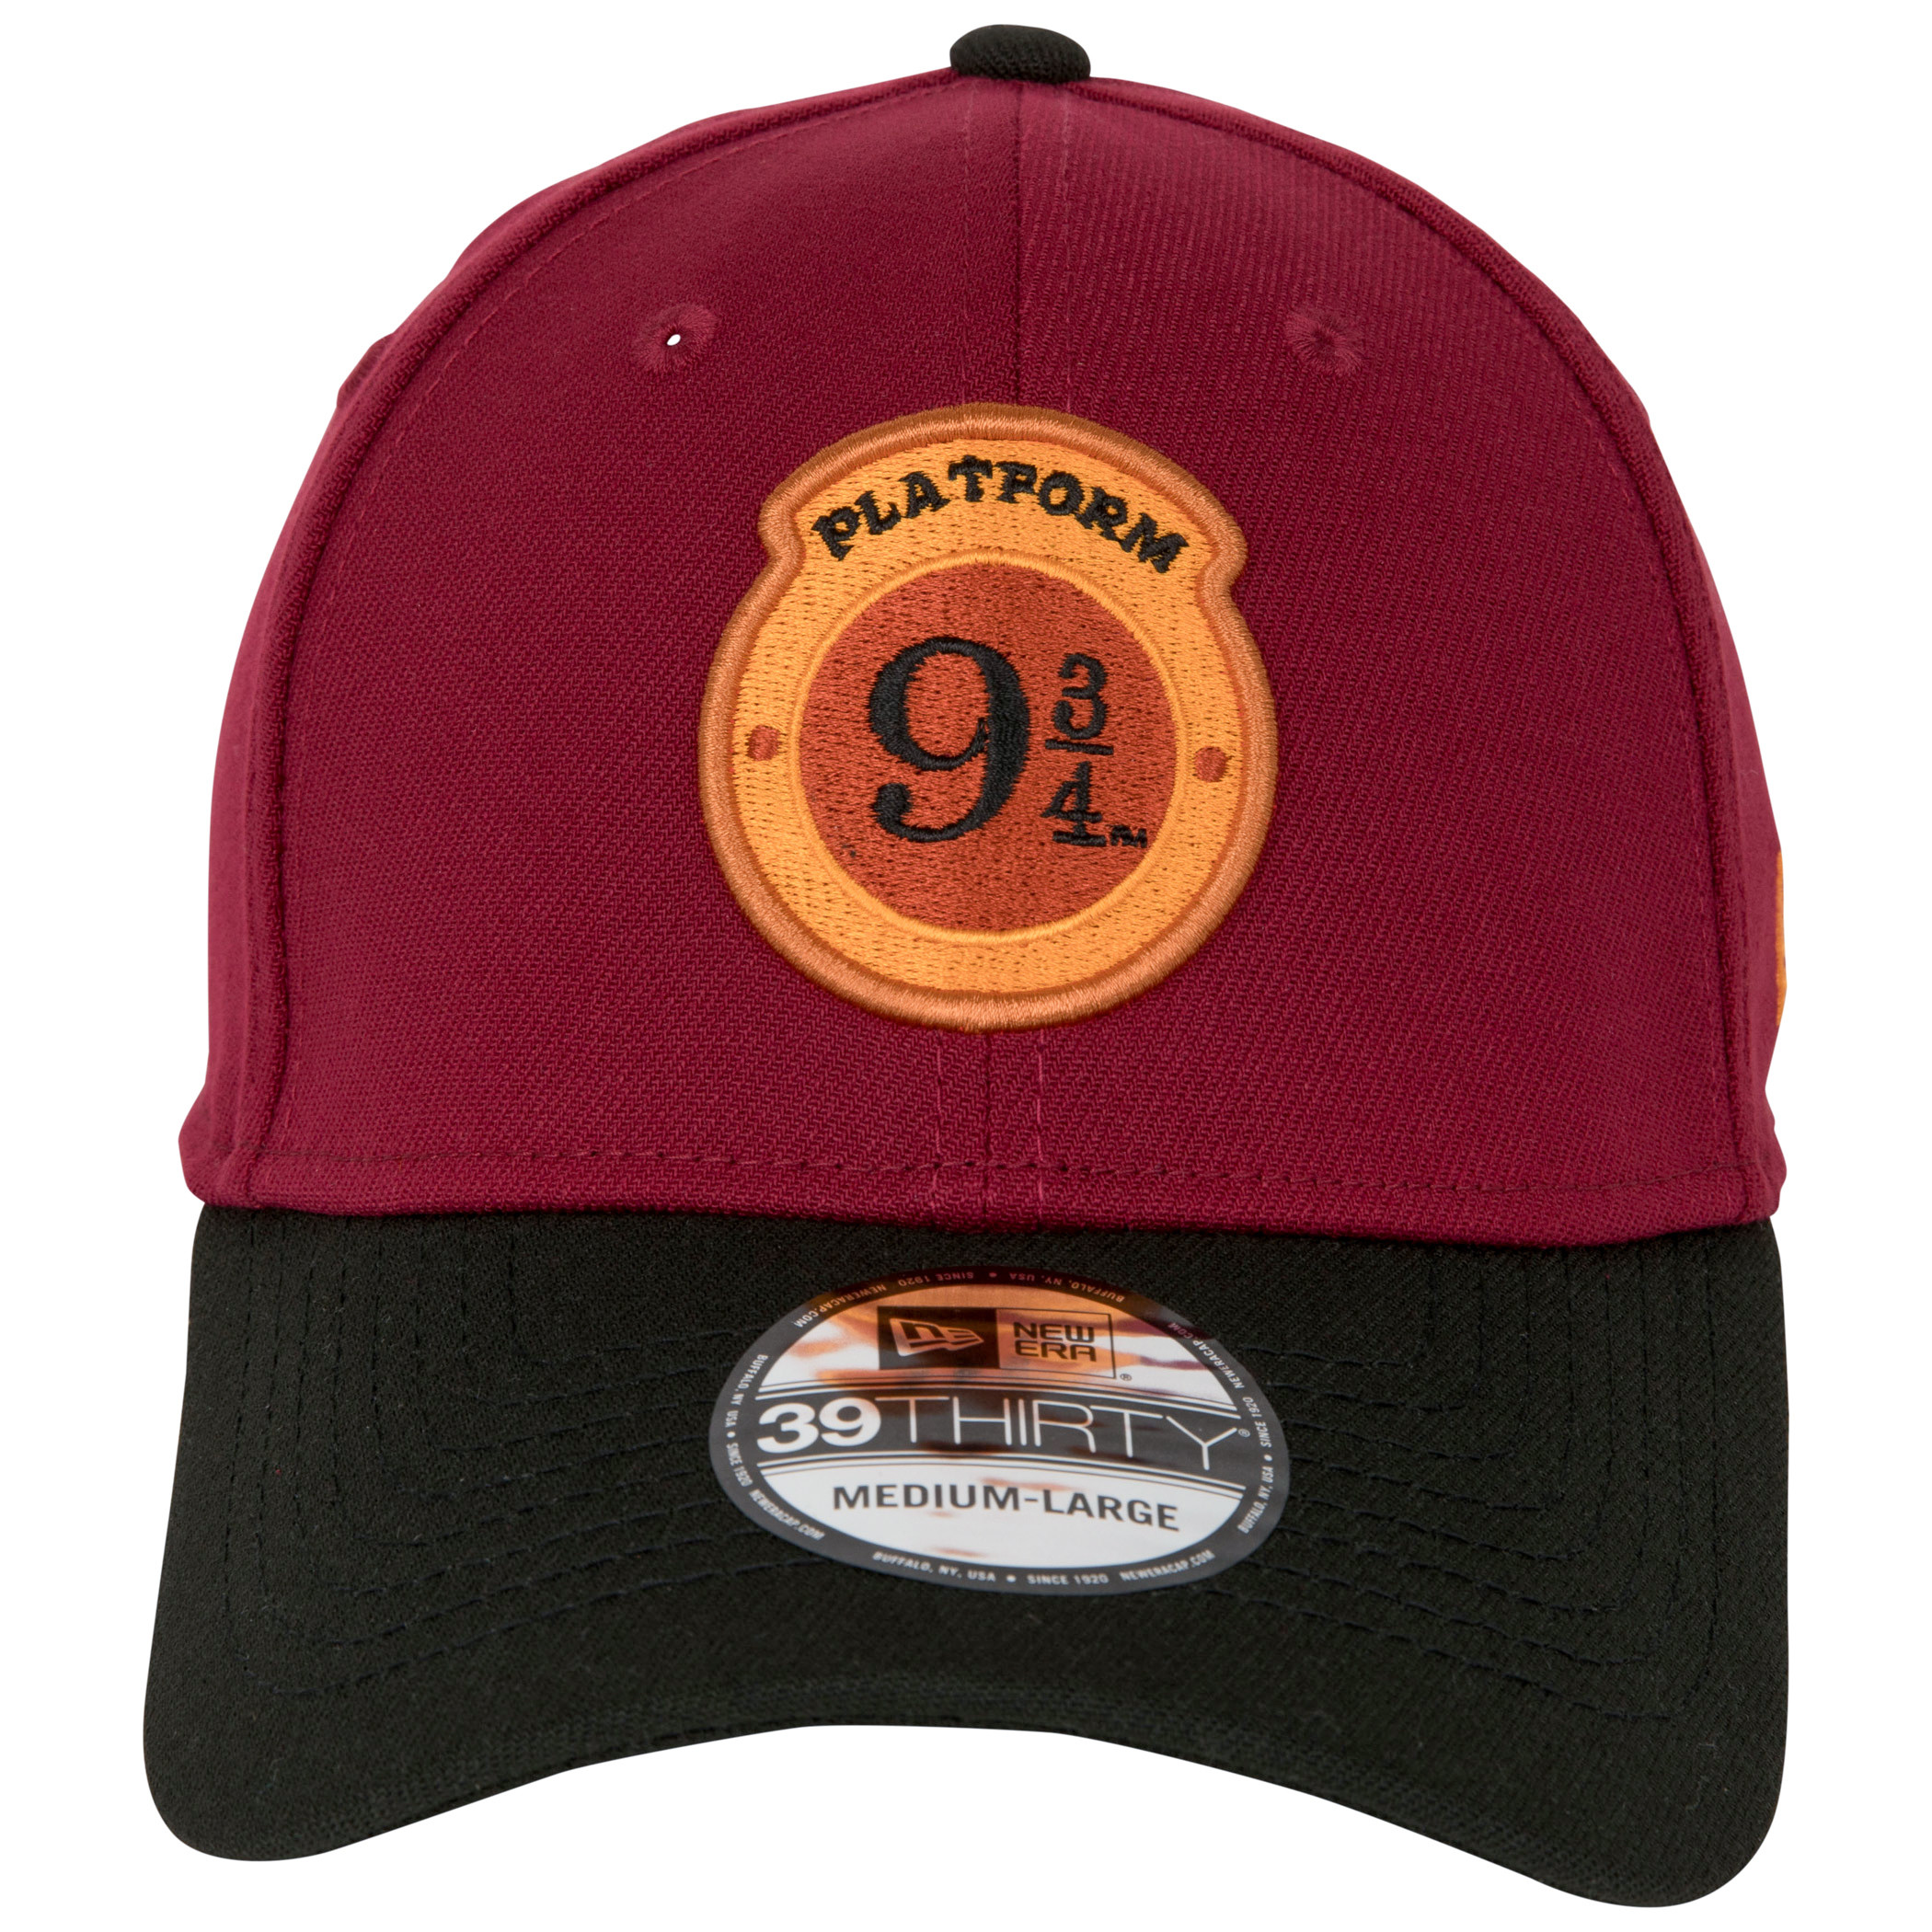 Harry Potter Platform 9 3/4 New Era 39Thirty Fitted Hat